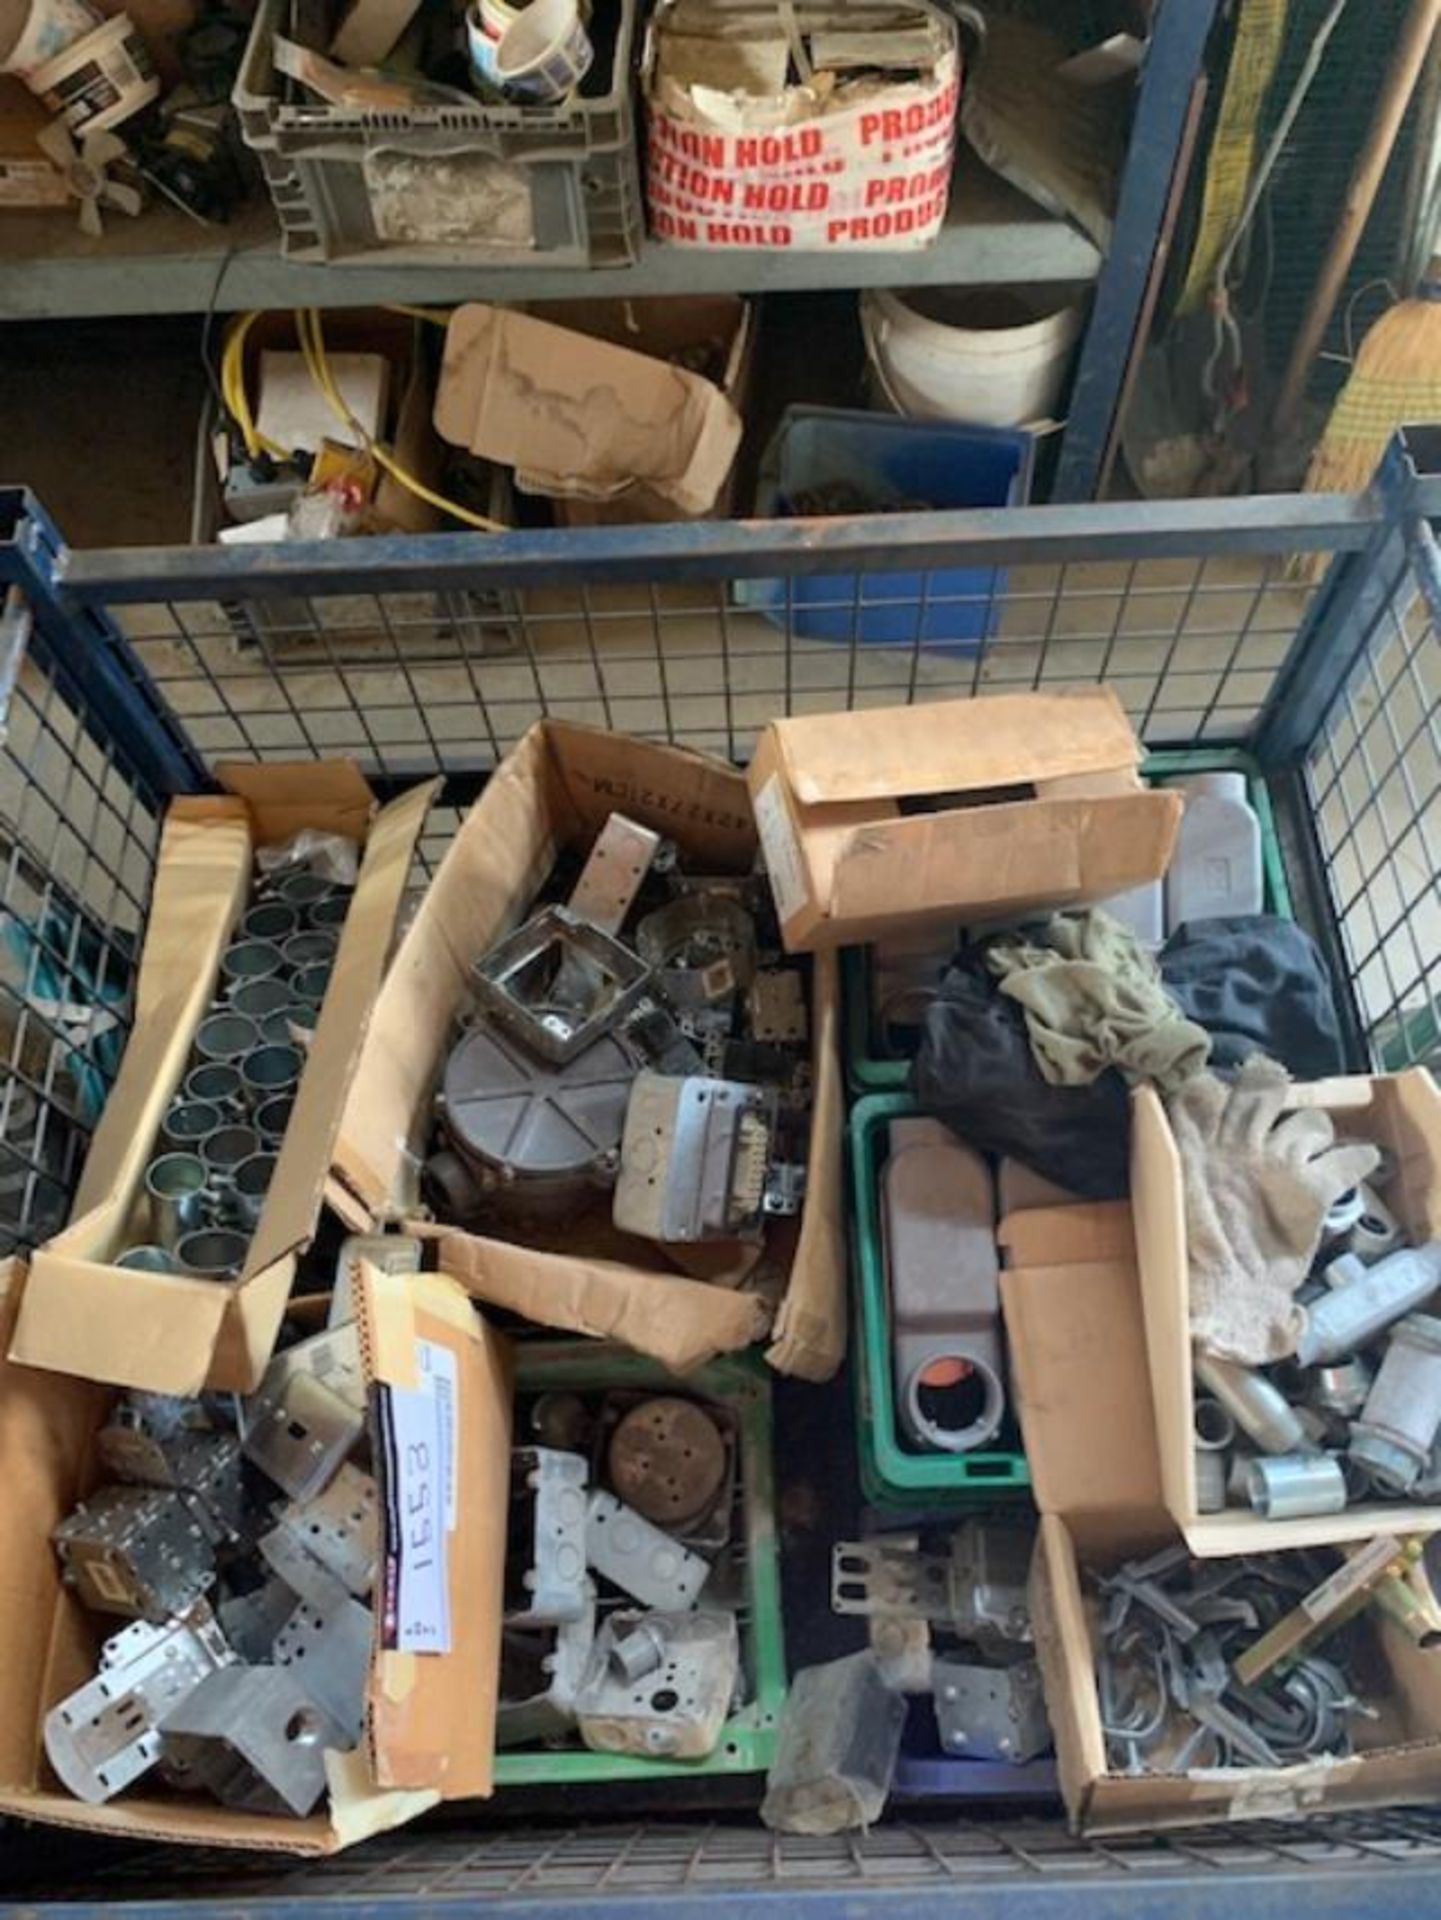 LOT OF ASSORTED ELECTRICAL FITTINGS, JOINTERS, 2 INCH LBS, 1.5 INCH CONDO JOINERS, JUNCTION BOXES,